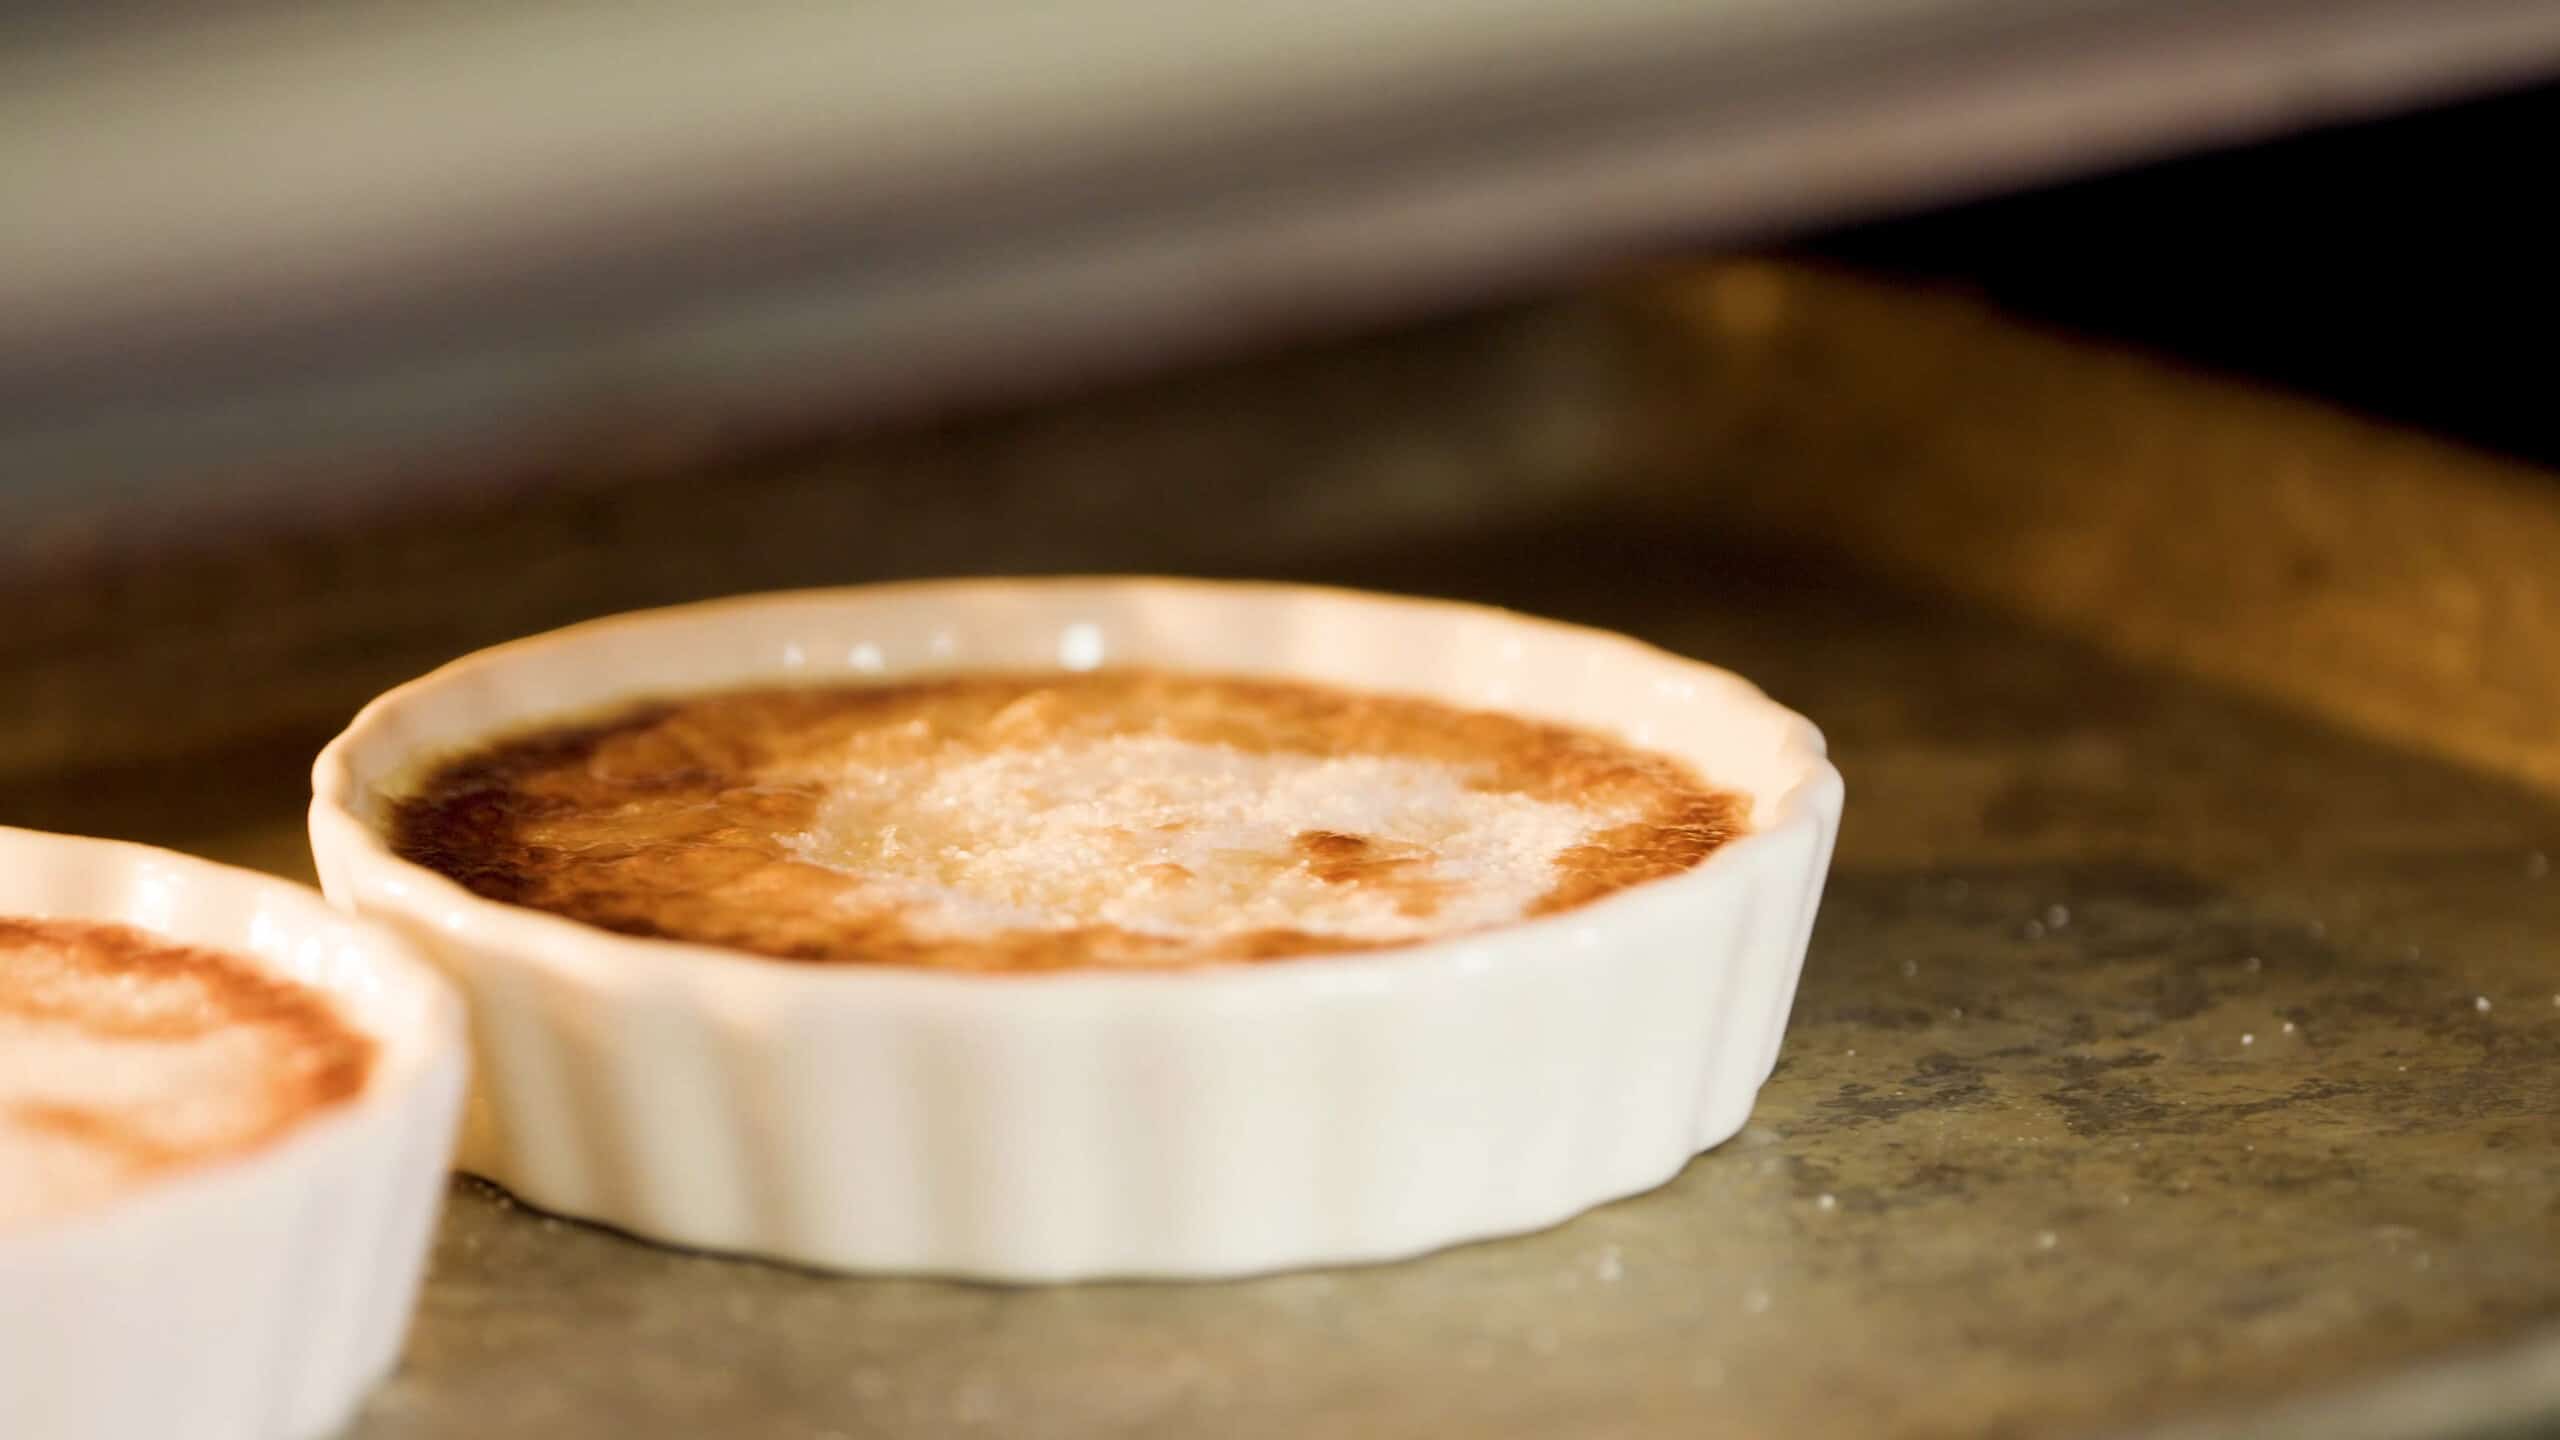 Close-up view inside an open oven showing a white glass ramekin filled with creme brûlée setting on a metal baking sheet white broiled to create the caramelized encrusted top of the dessert.